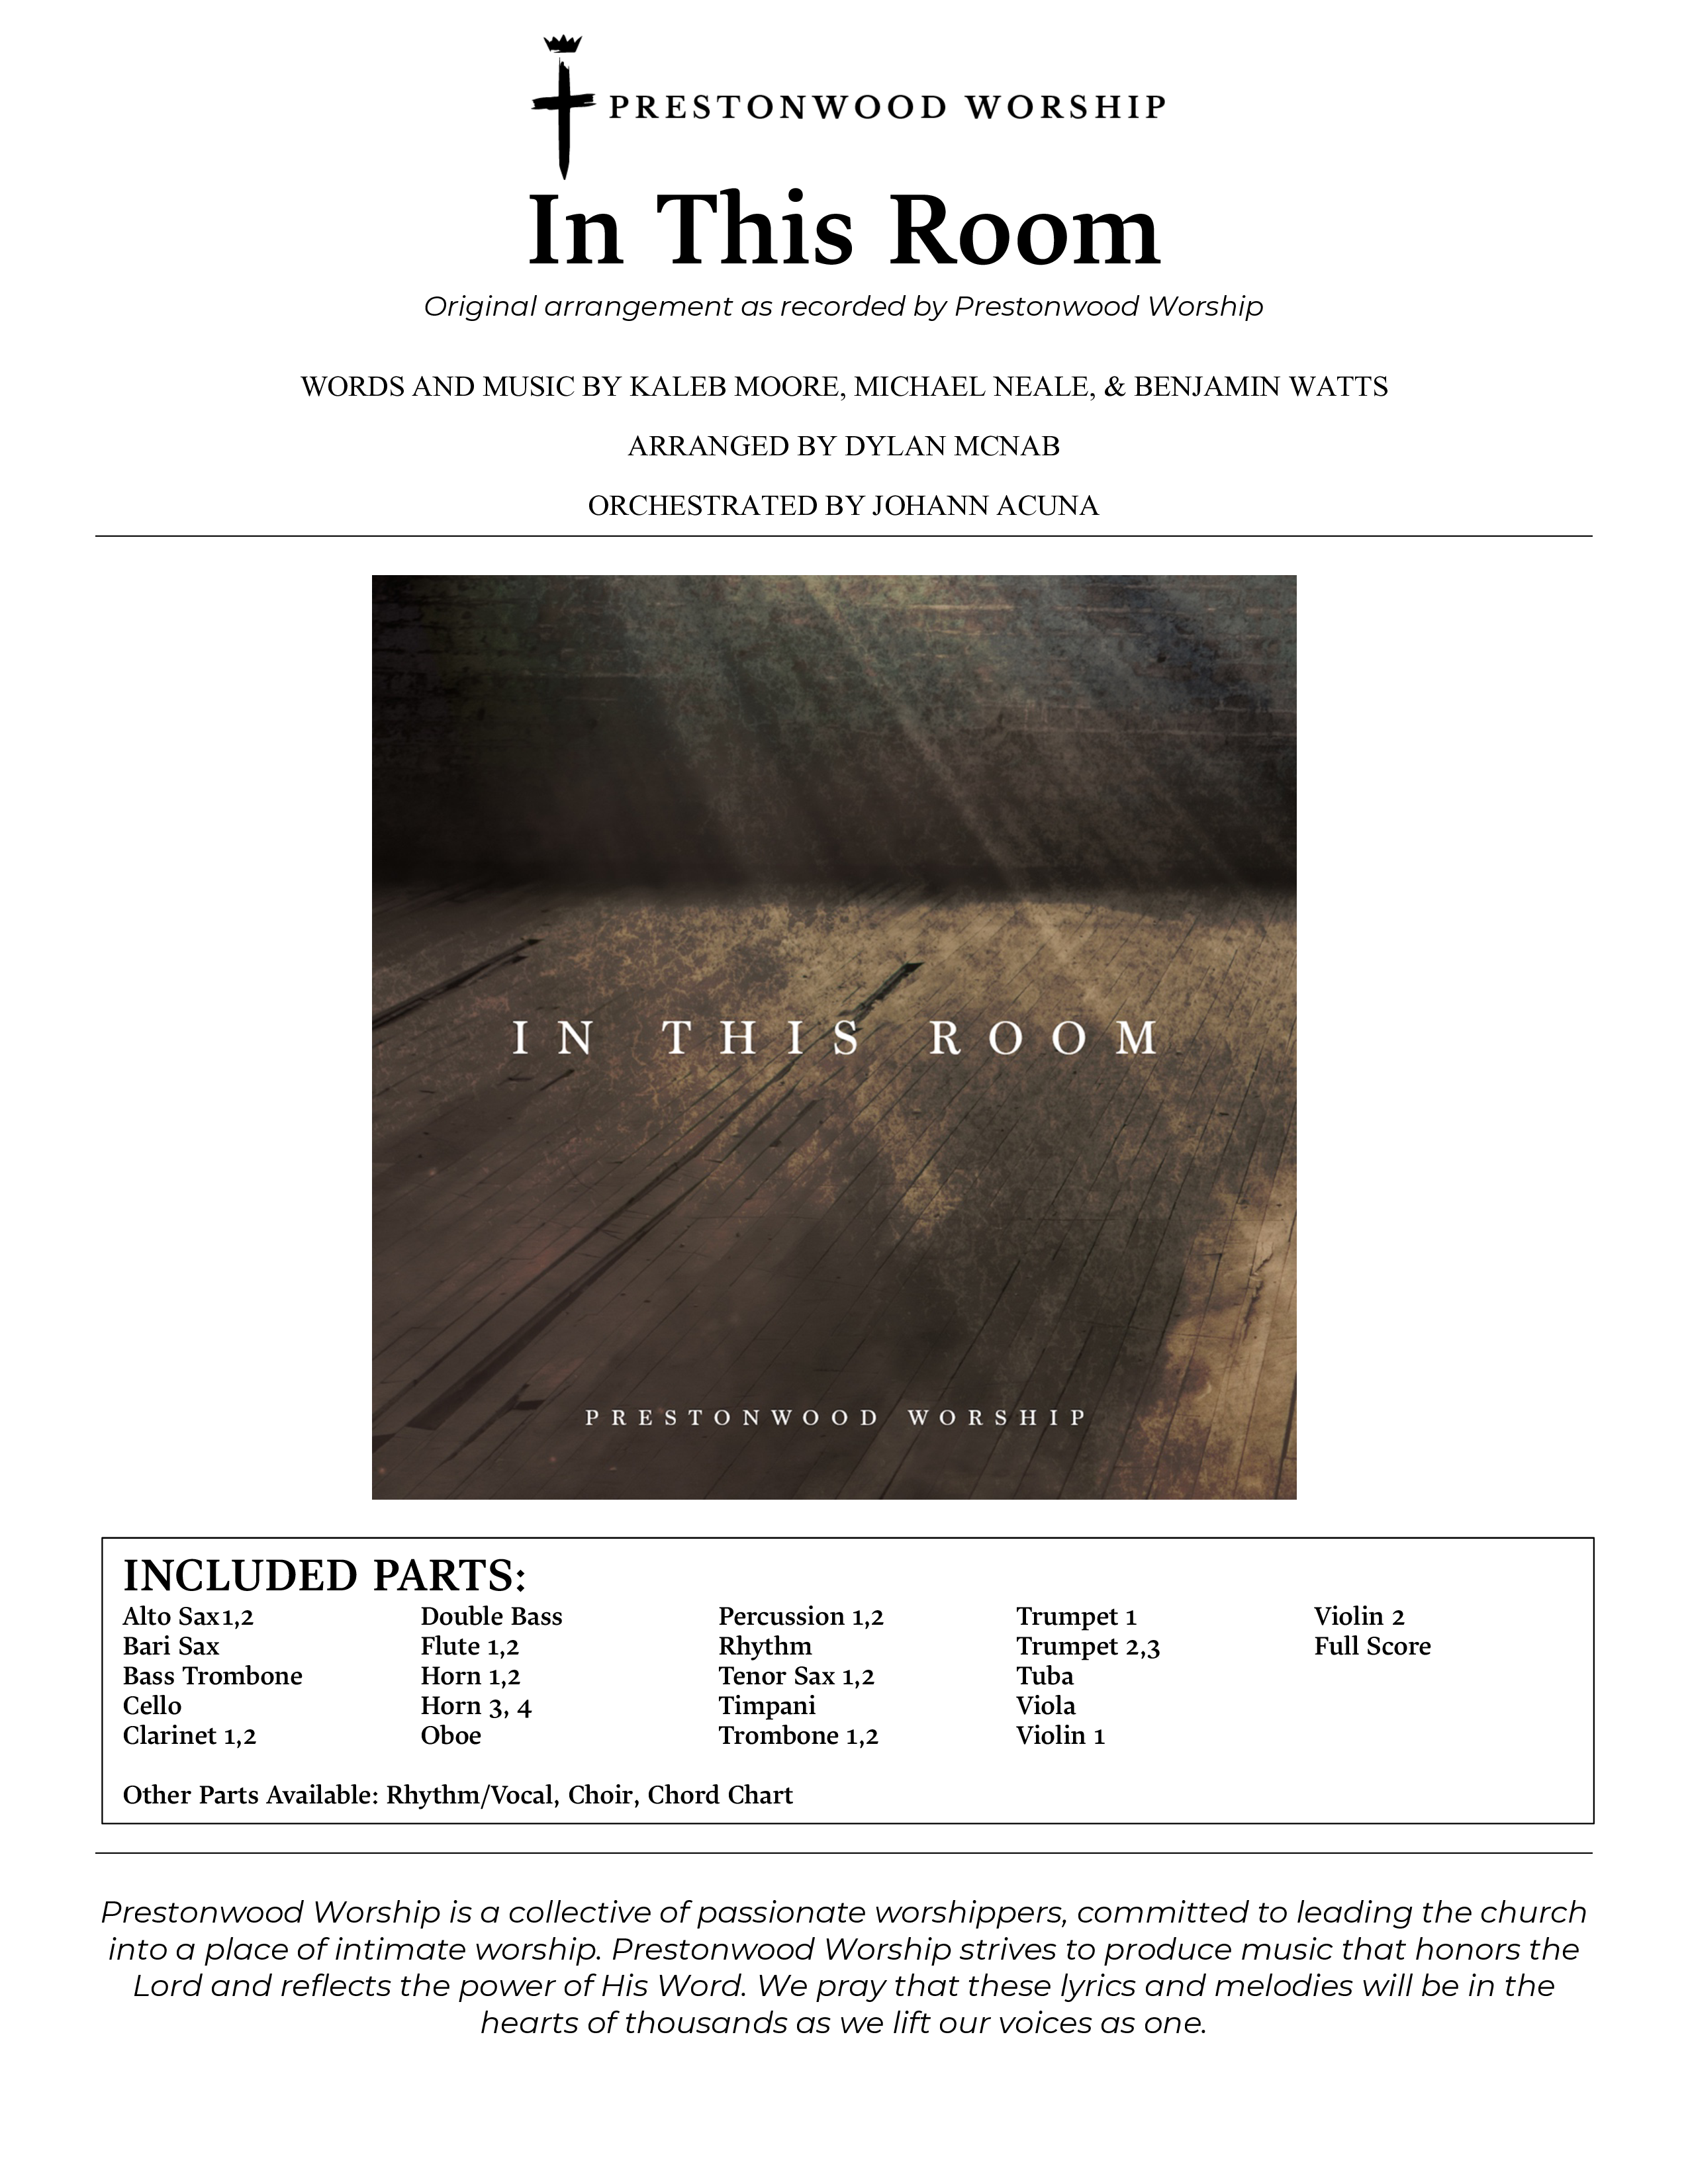 In This Room Orchestration (Prestonwood Worship / Arr. Dylan McNab / Orch. Johann Acuna)